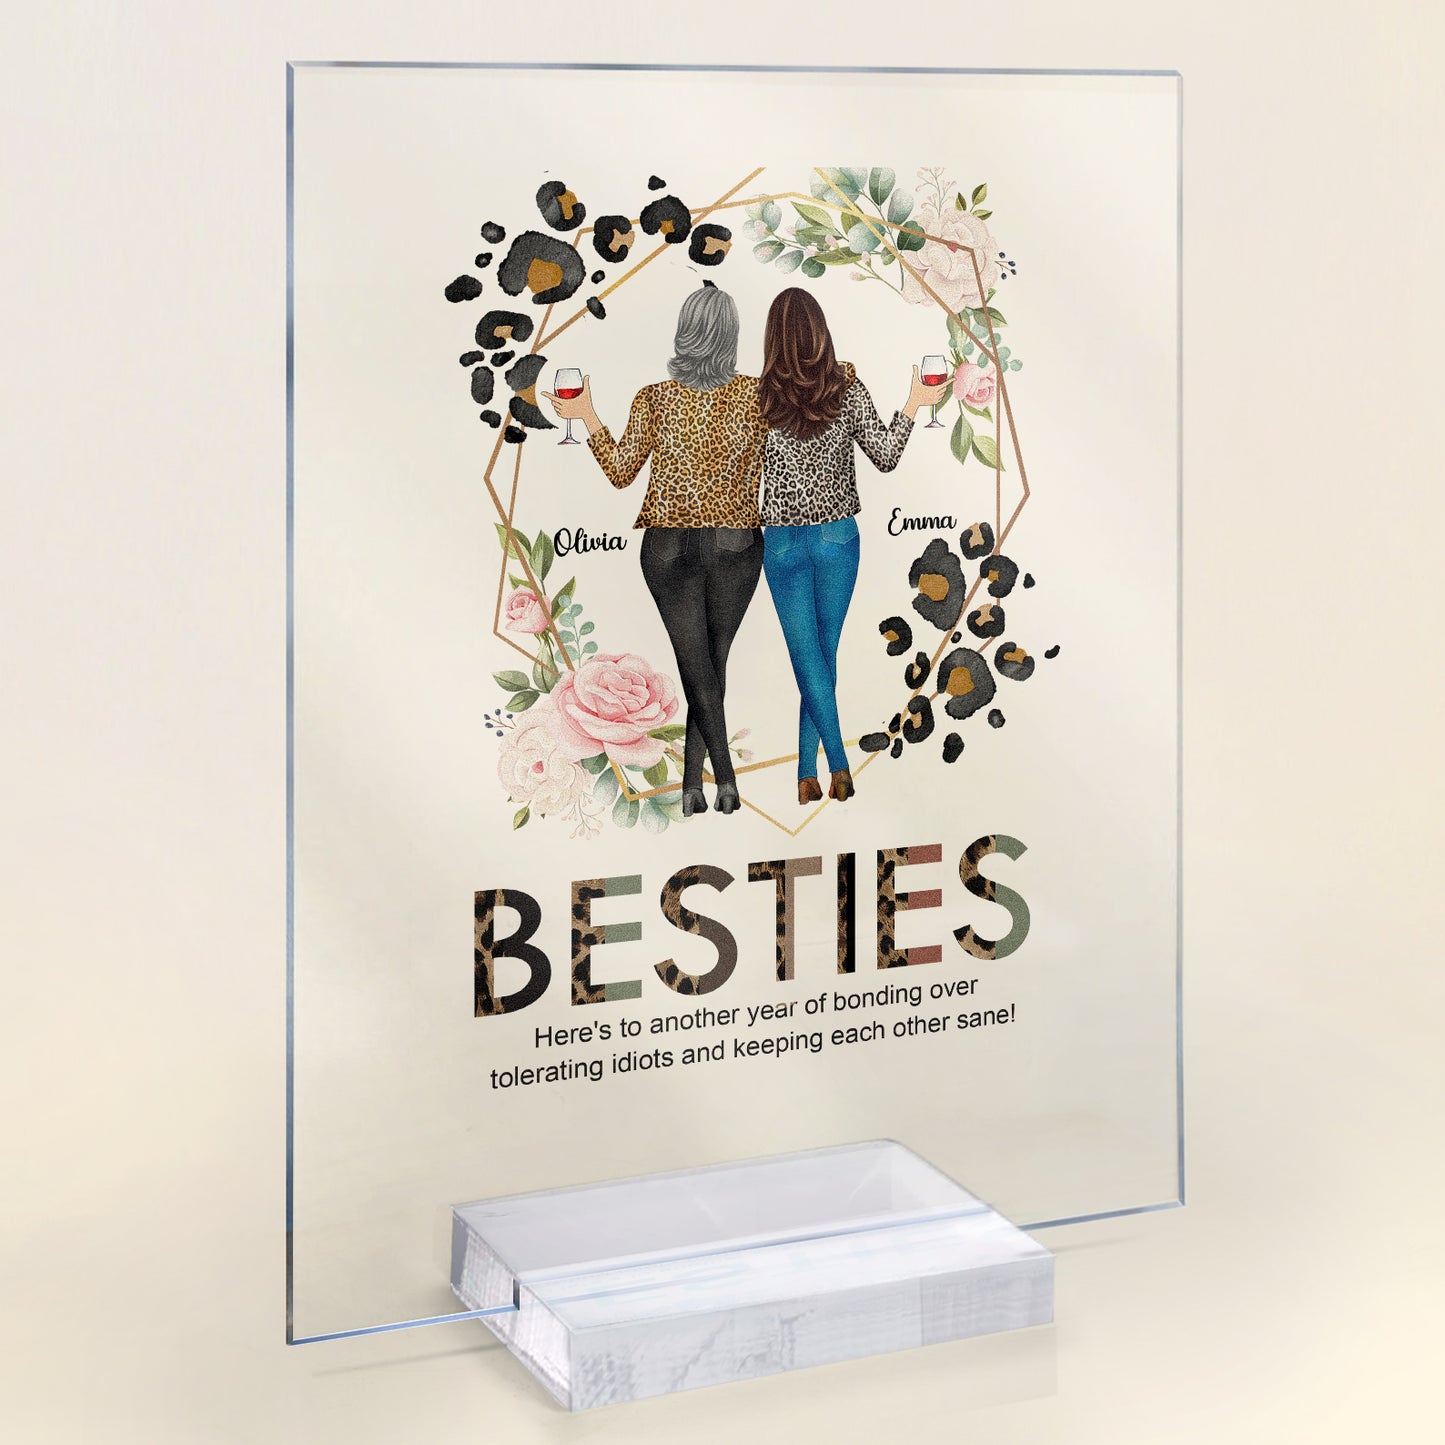 Besties, Tolerating Idiots, Bonding Over Alcohol - Personalized Acrylic Plaque - Birthday Gift For Bestie, Friend, Sister, Work Bestie, Colleague